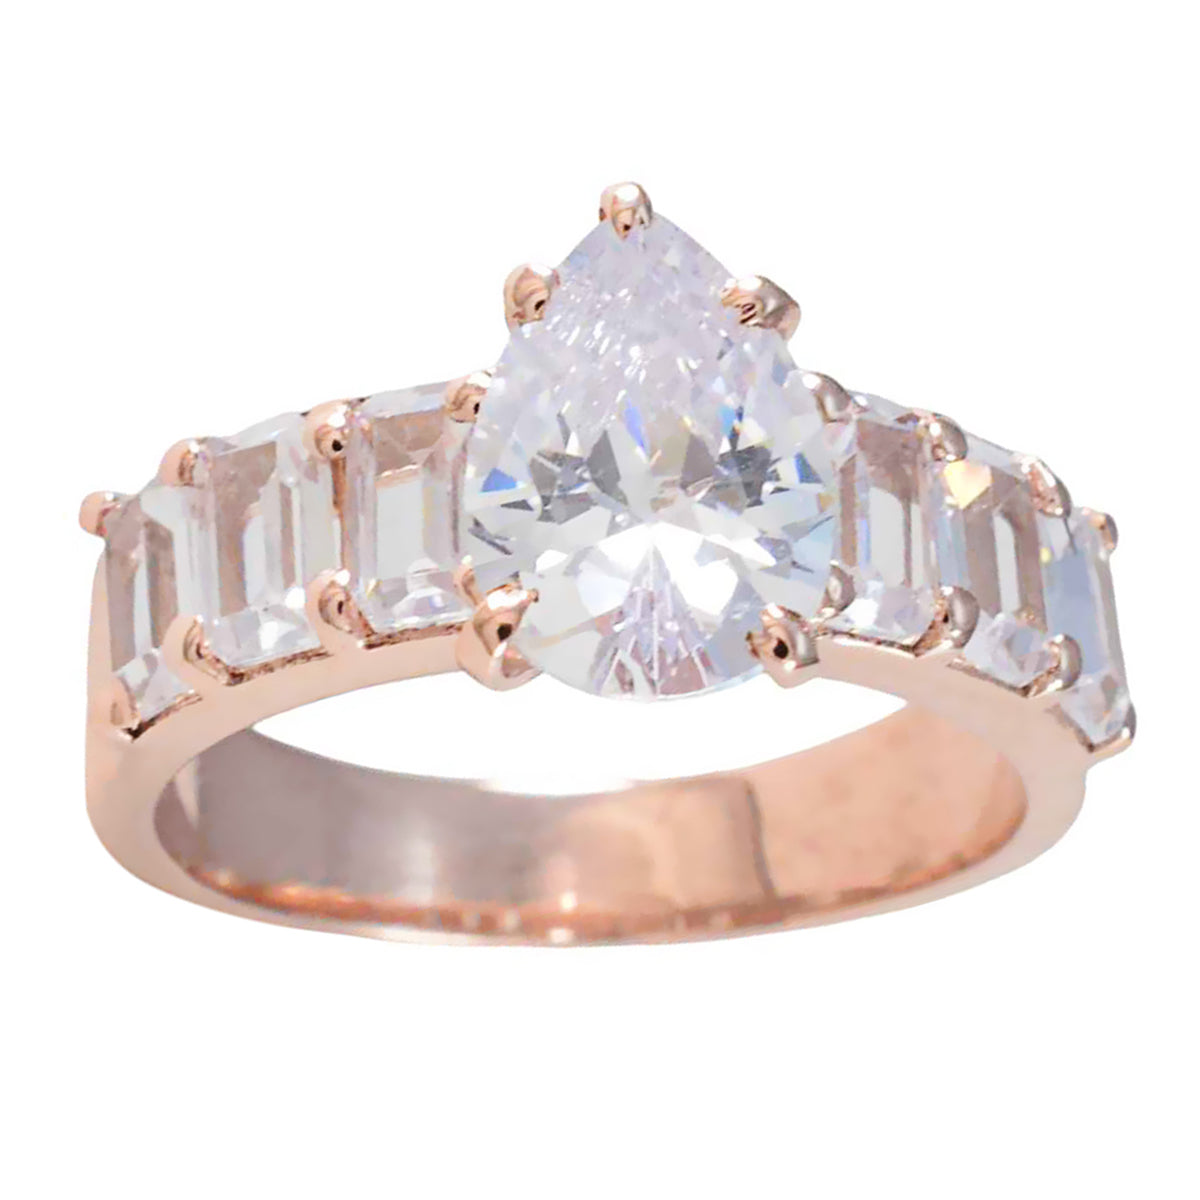 Riyo India Silver Ring With Rose Gold Plating White CZ Stone Pear Shape Prong Setting Designer Jewelry Engagement Ring